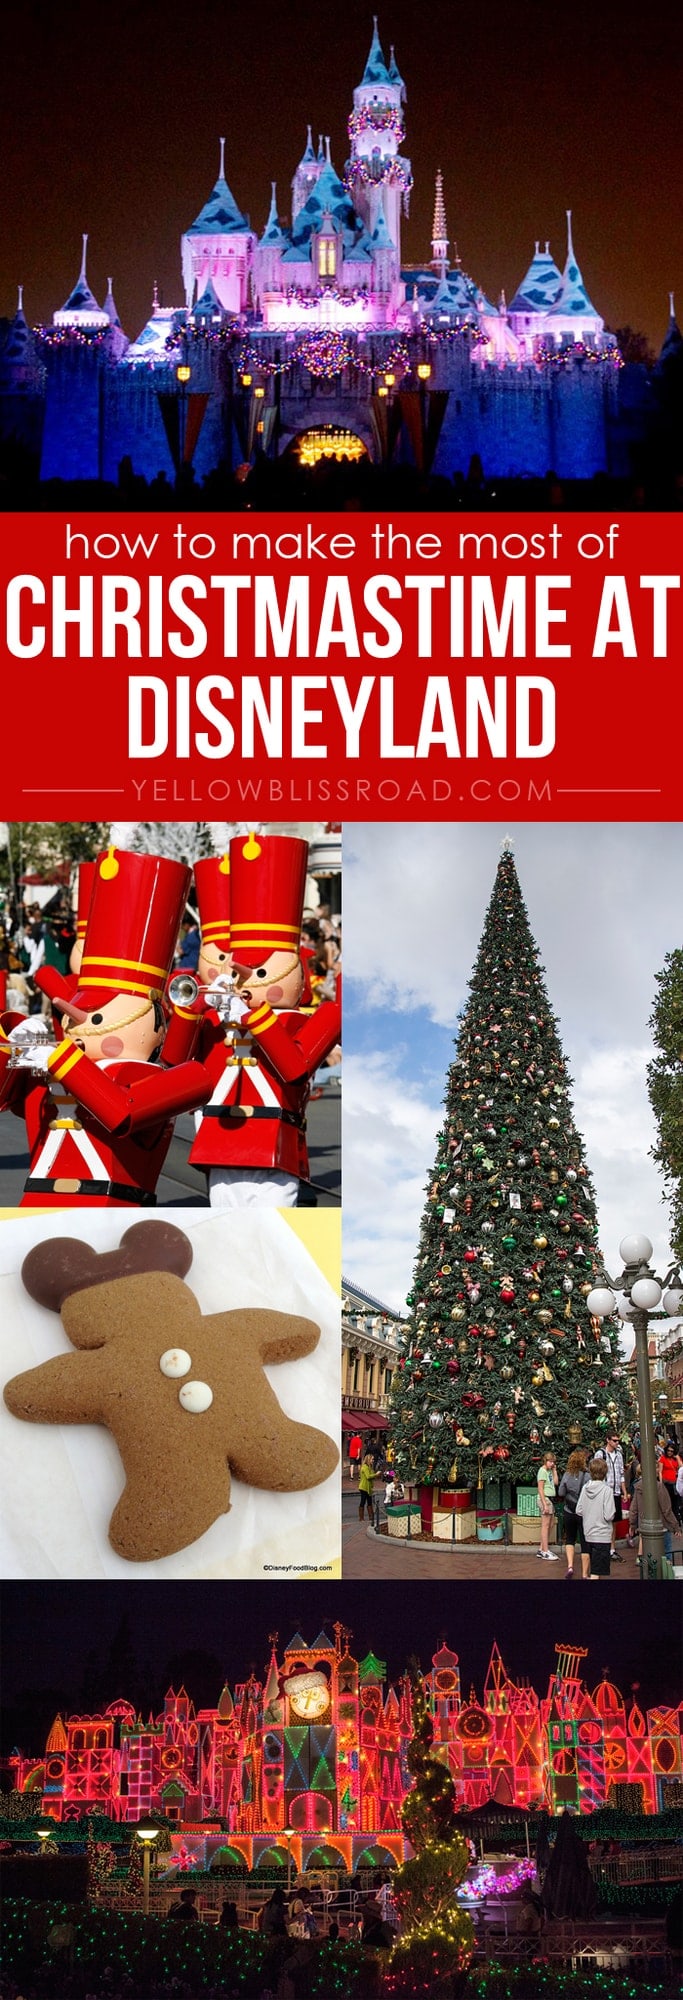 How to Make the Most of Christmastime at Disneyland